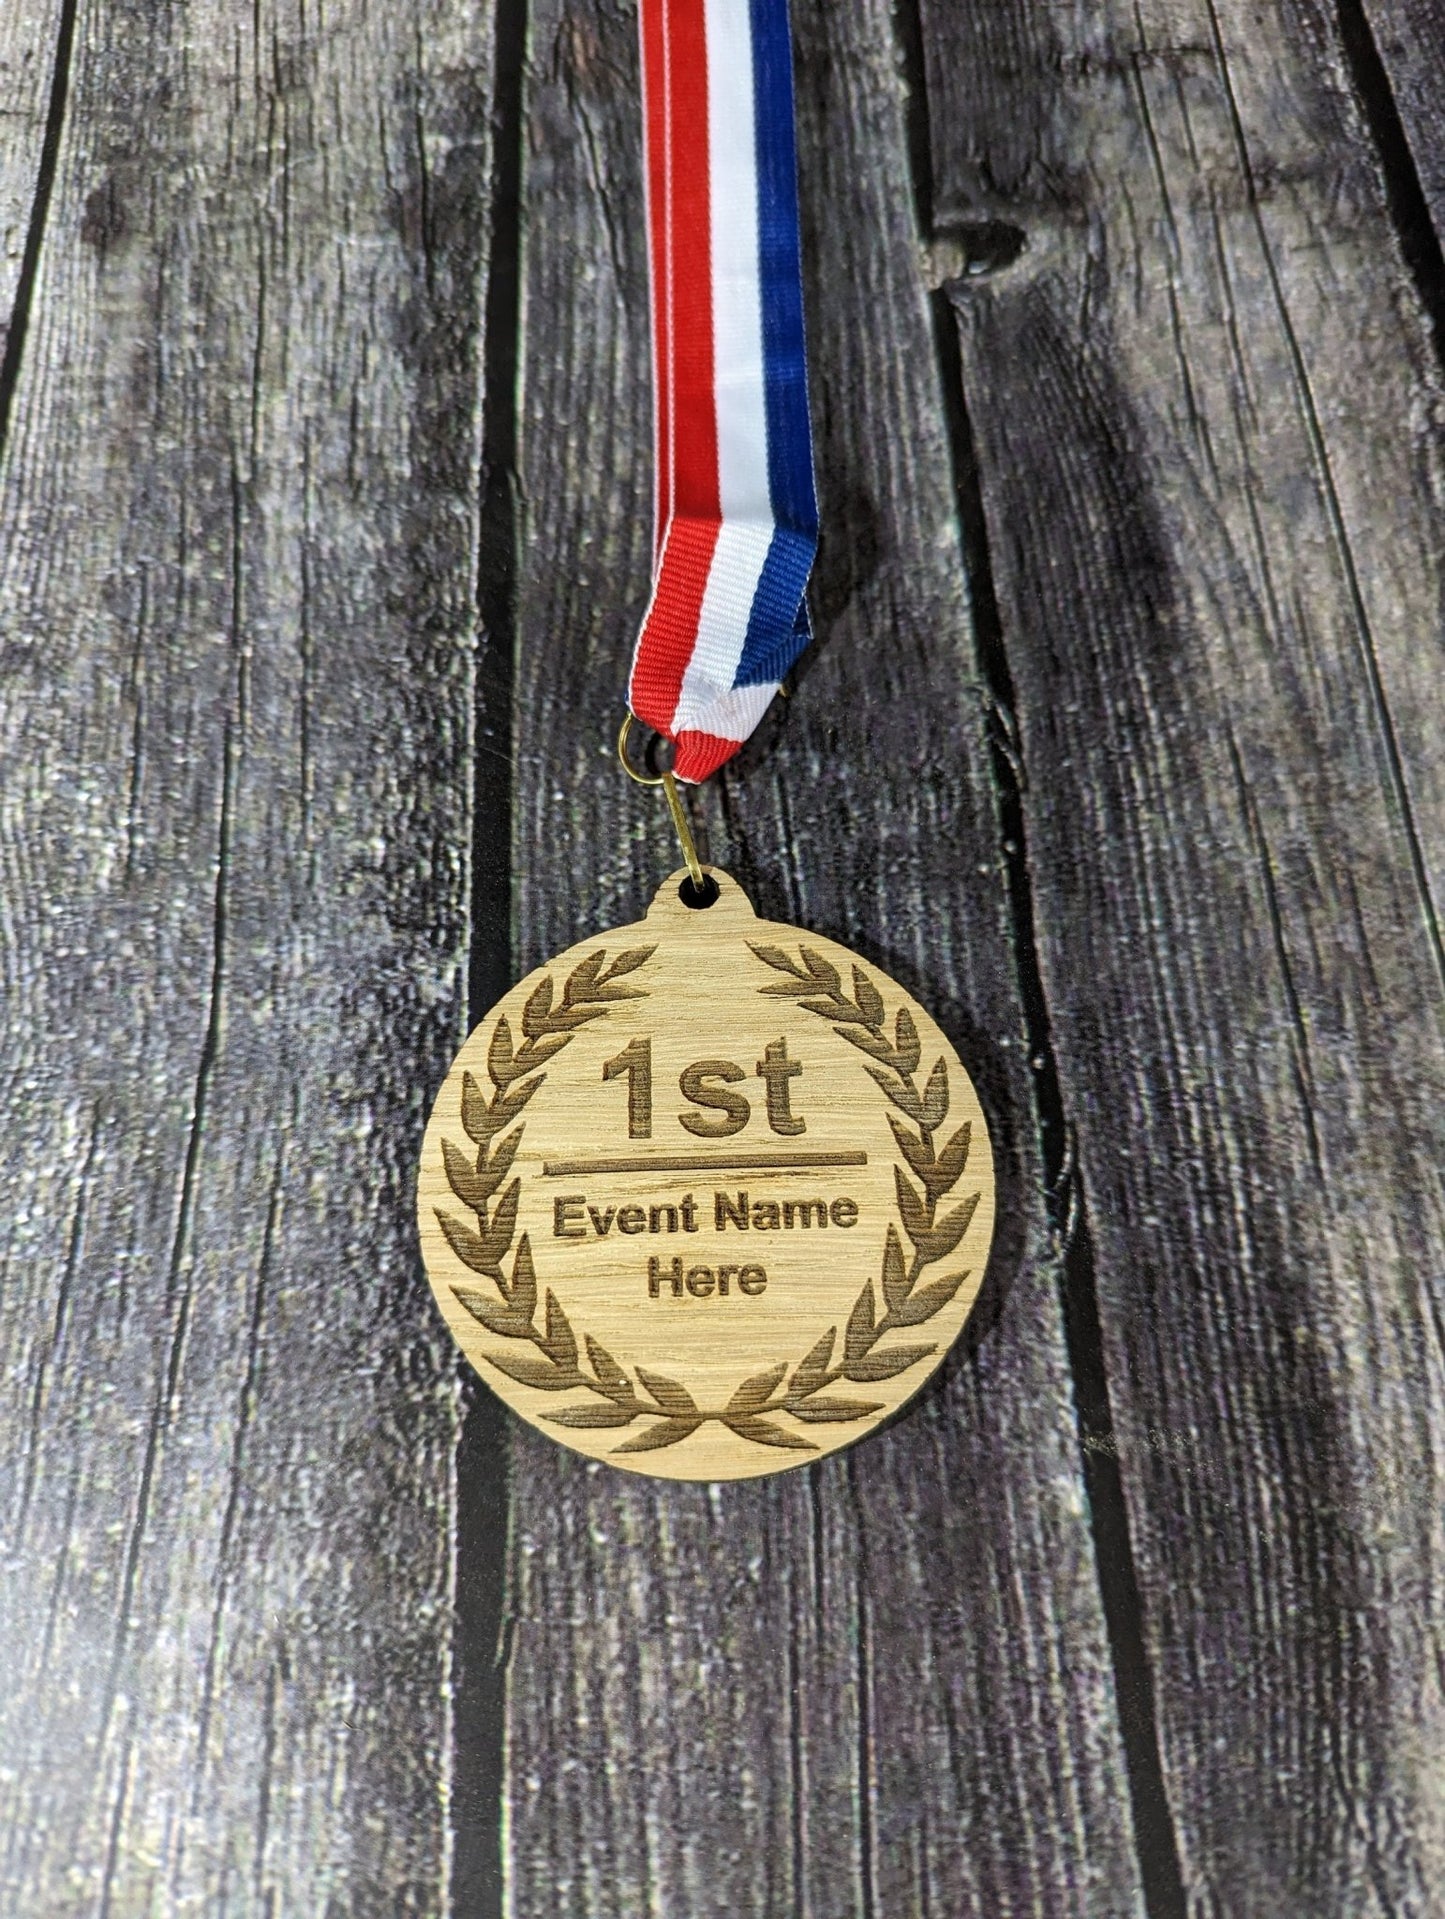 Bespoke Wooden Medals, Free Design Service, Sporting Events, Business Awards, Sponsorships, Custom Medals - CherryGroveCraft